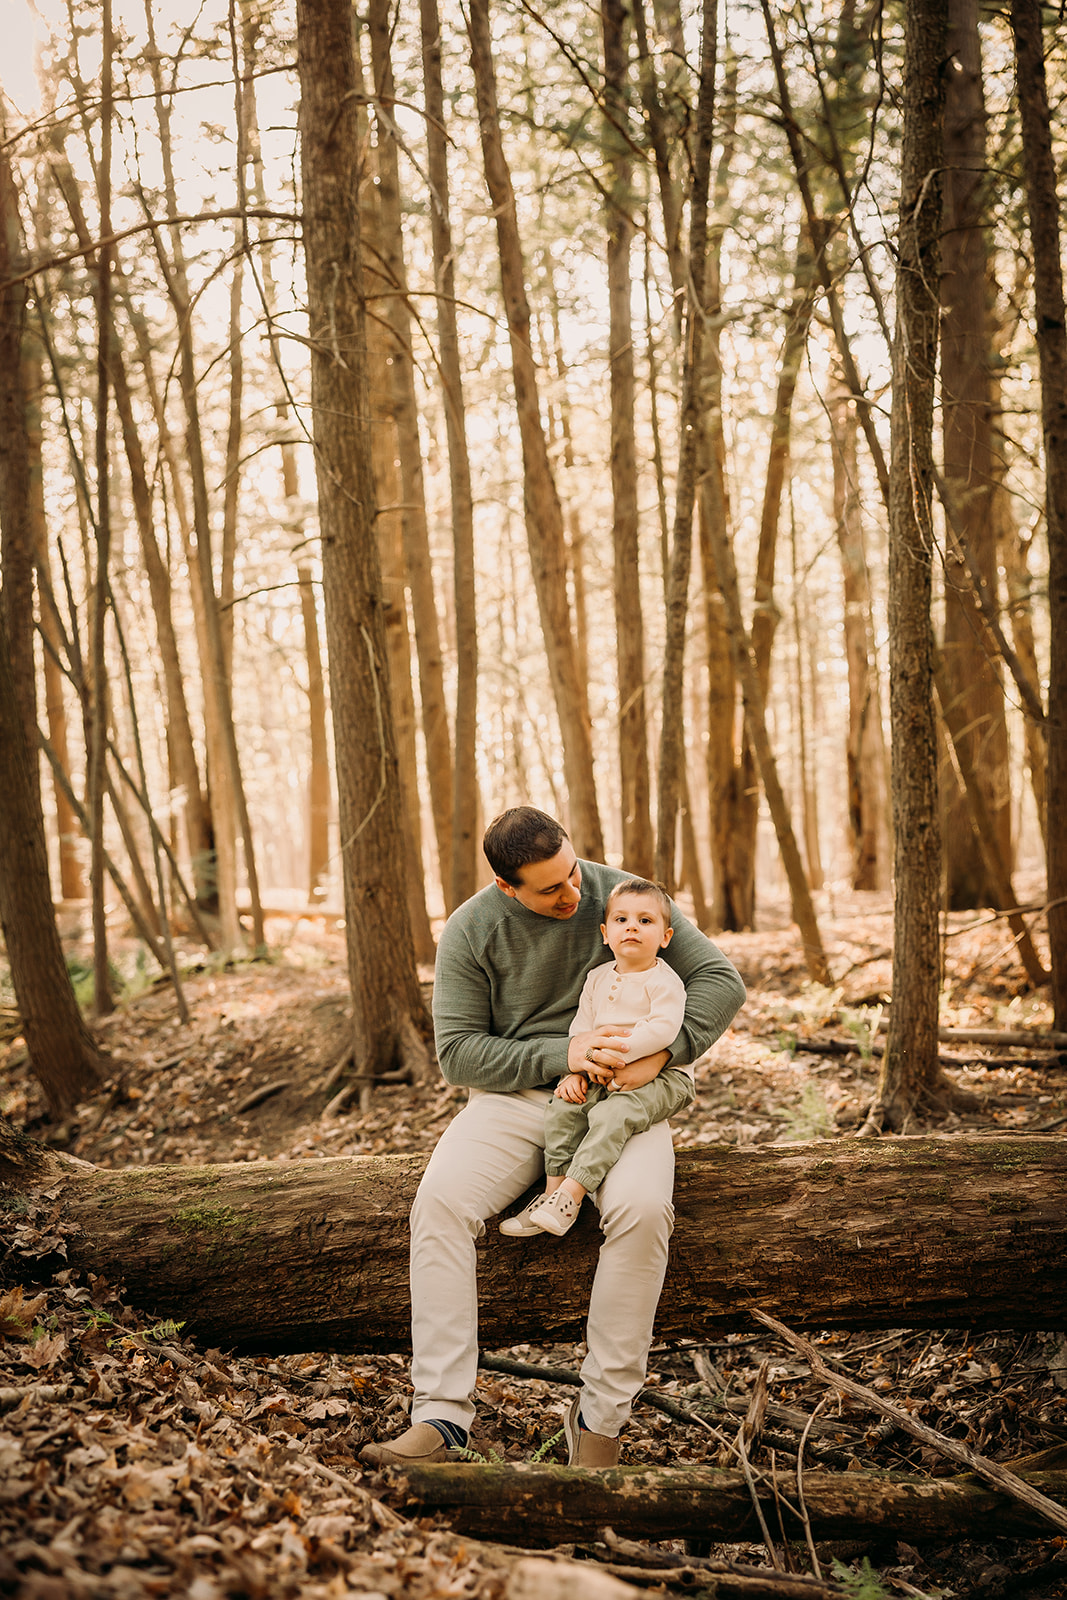 Family united in nature's embrace: Ottawa Forest photoshoot